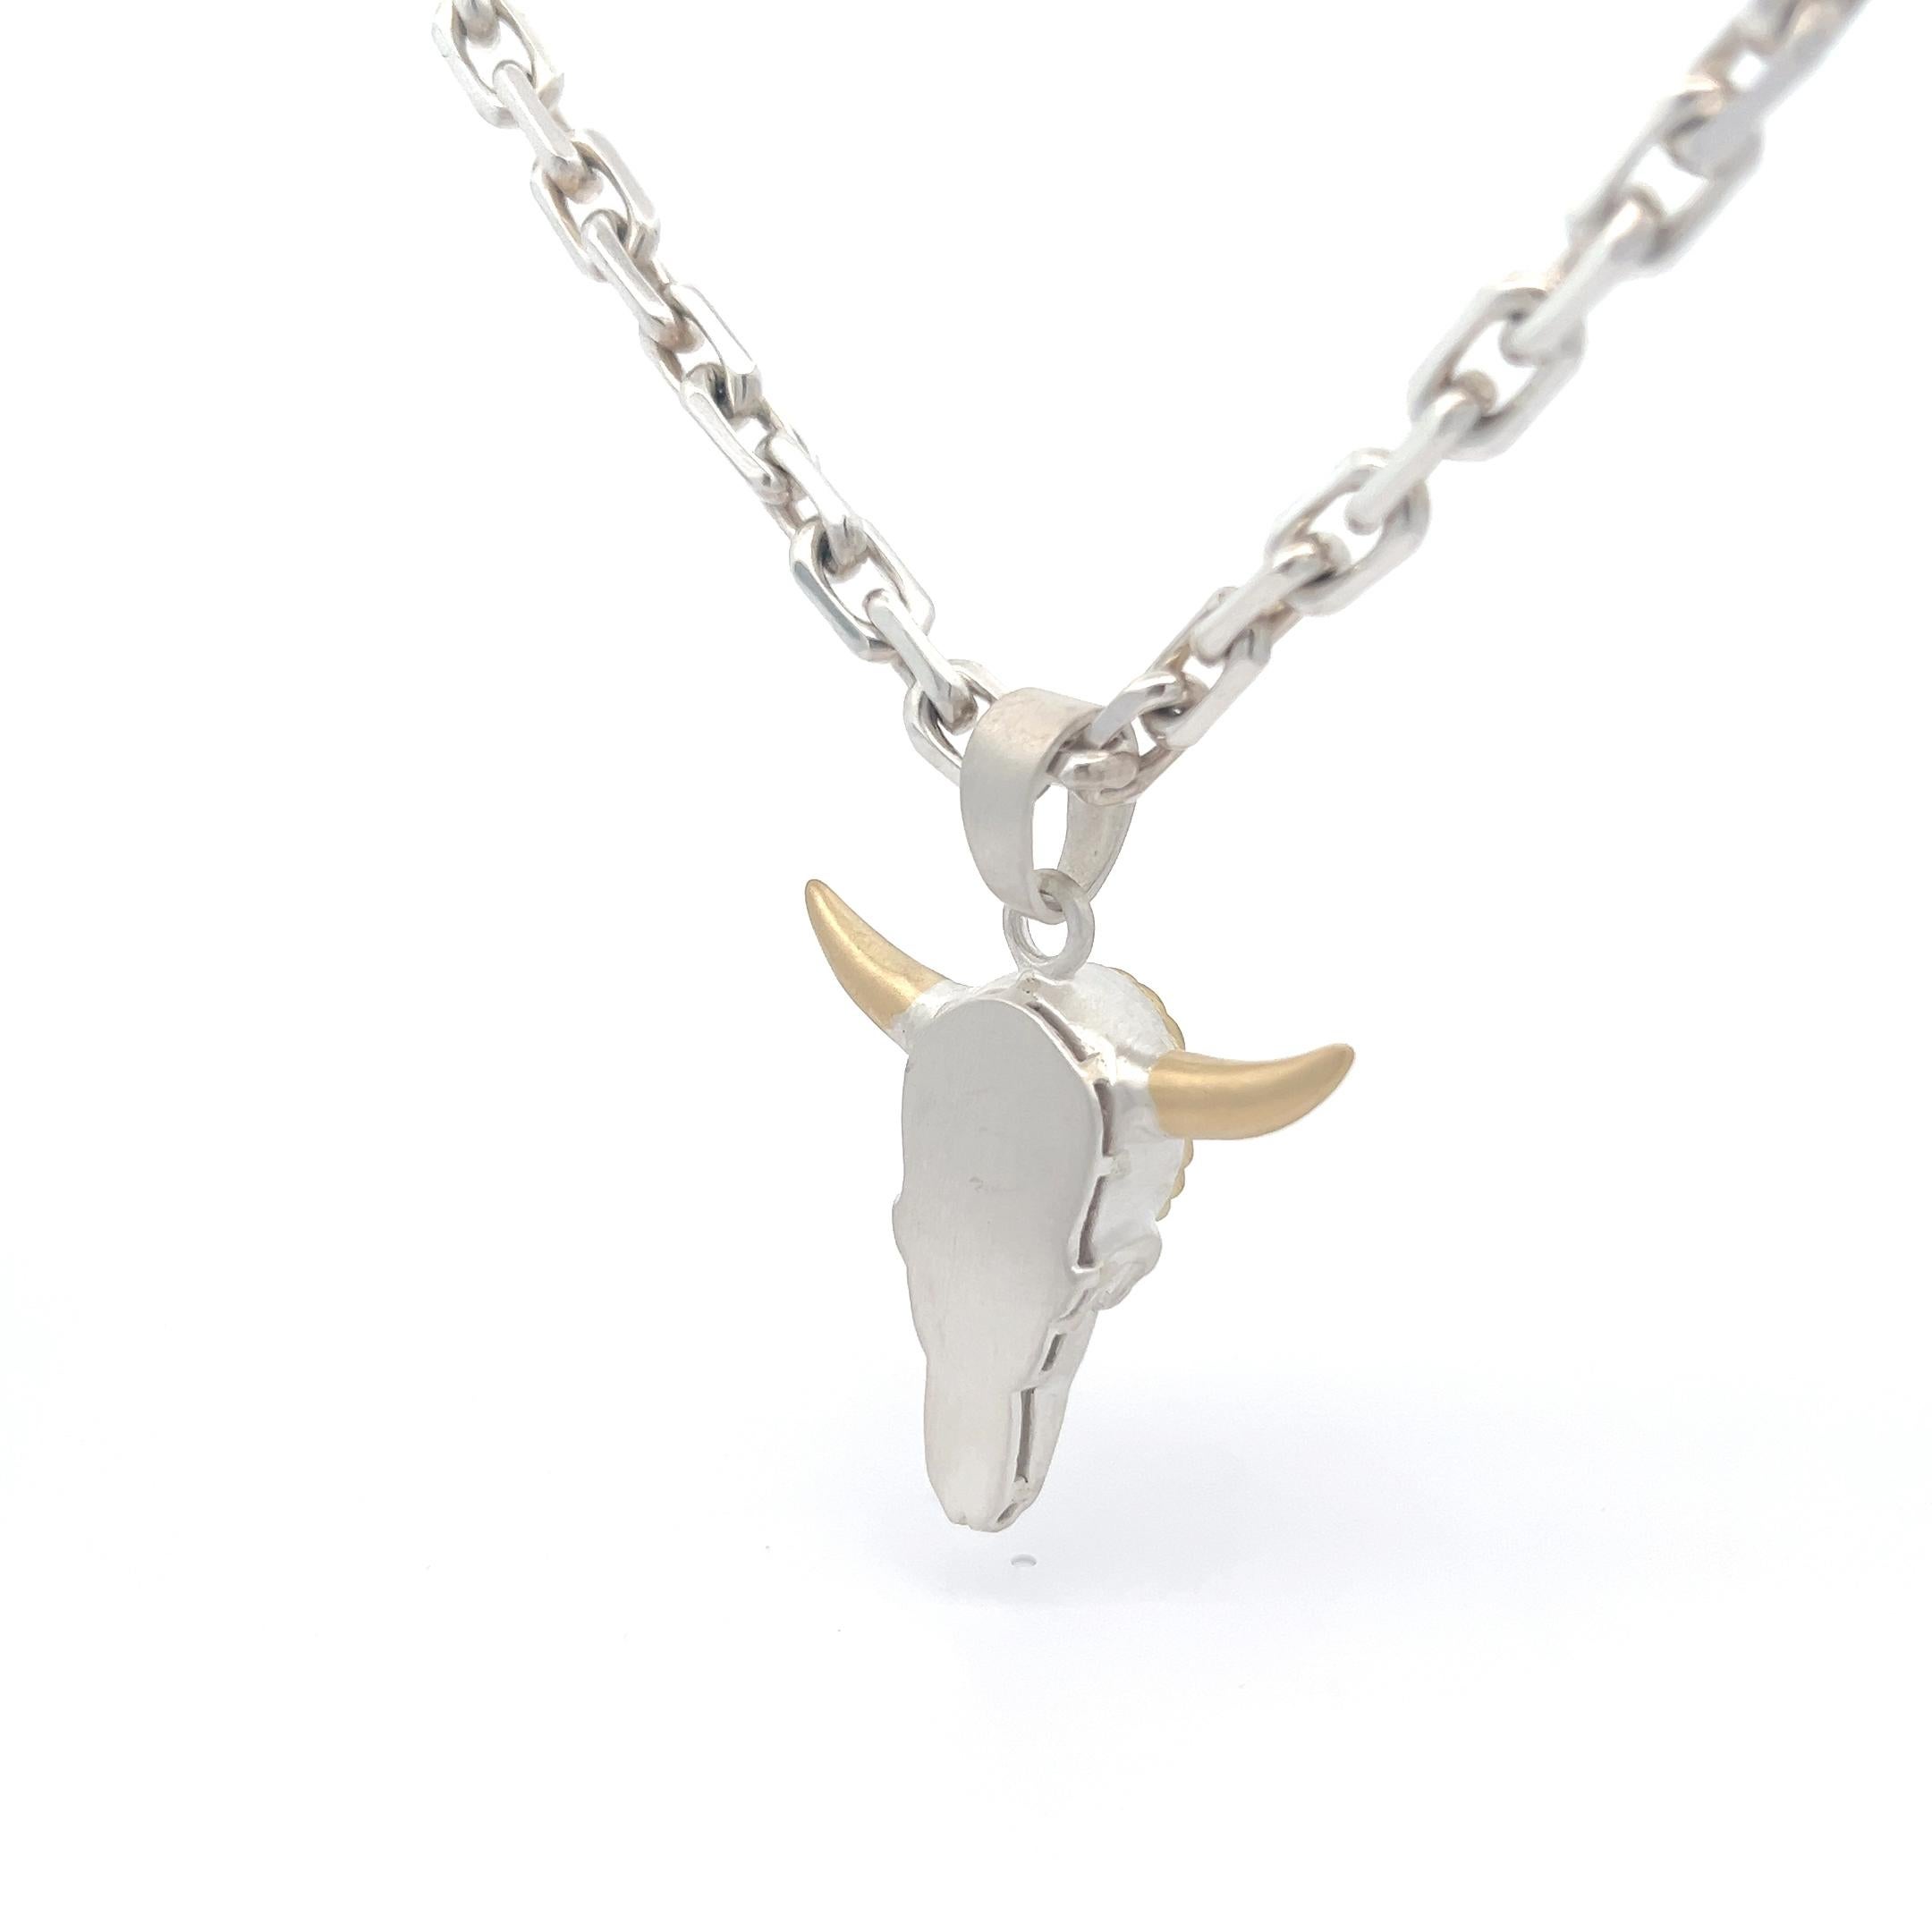 Elevate your accessory game with this stunning pendant necklace, a true testament to artisan craftsmanship and timeless style. Crafted from sterling silver and accented with luxurious 18k yellow gold, the centerpiece of this necklace features a